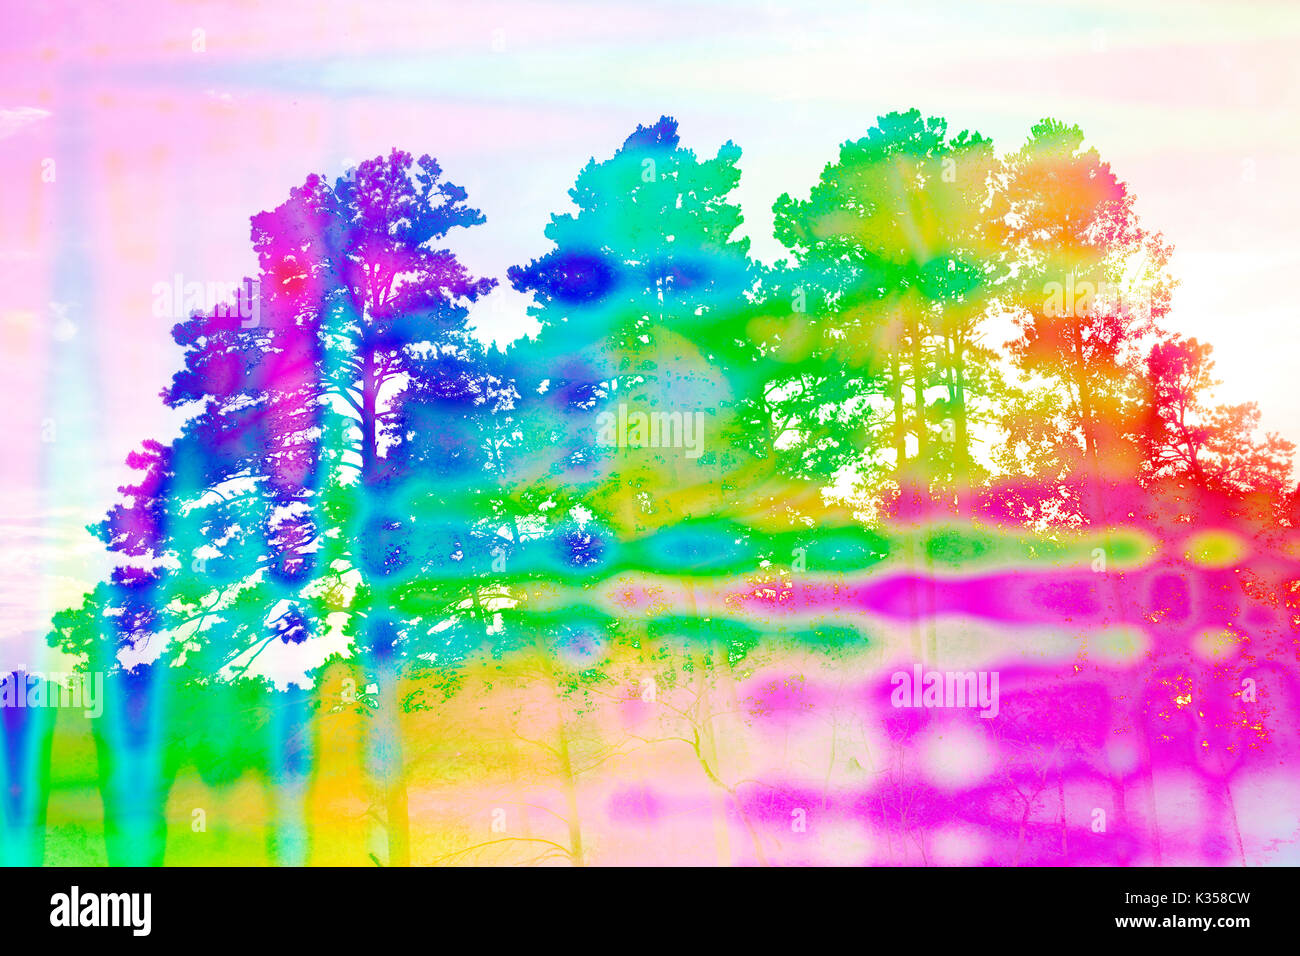 An abstract psychedelic image of a forest. Stock Photo